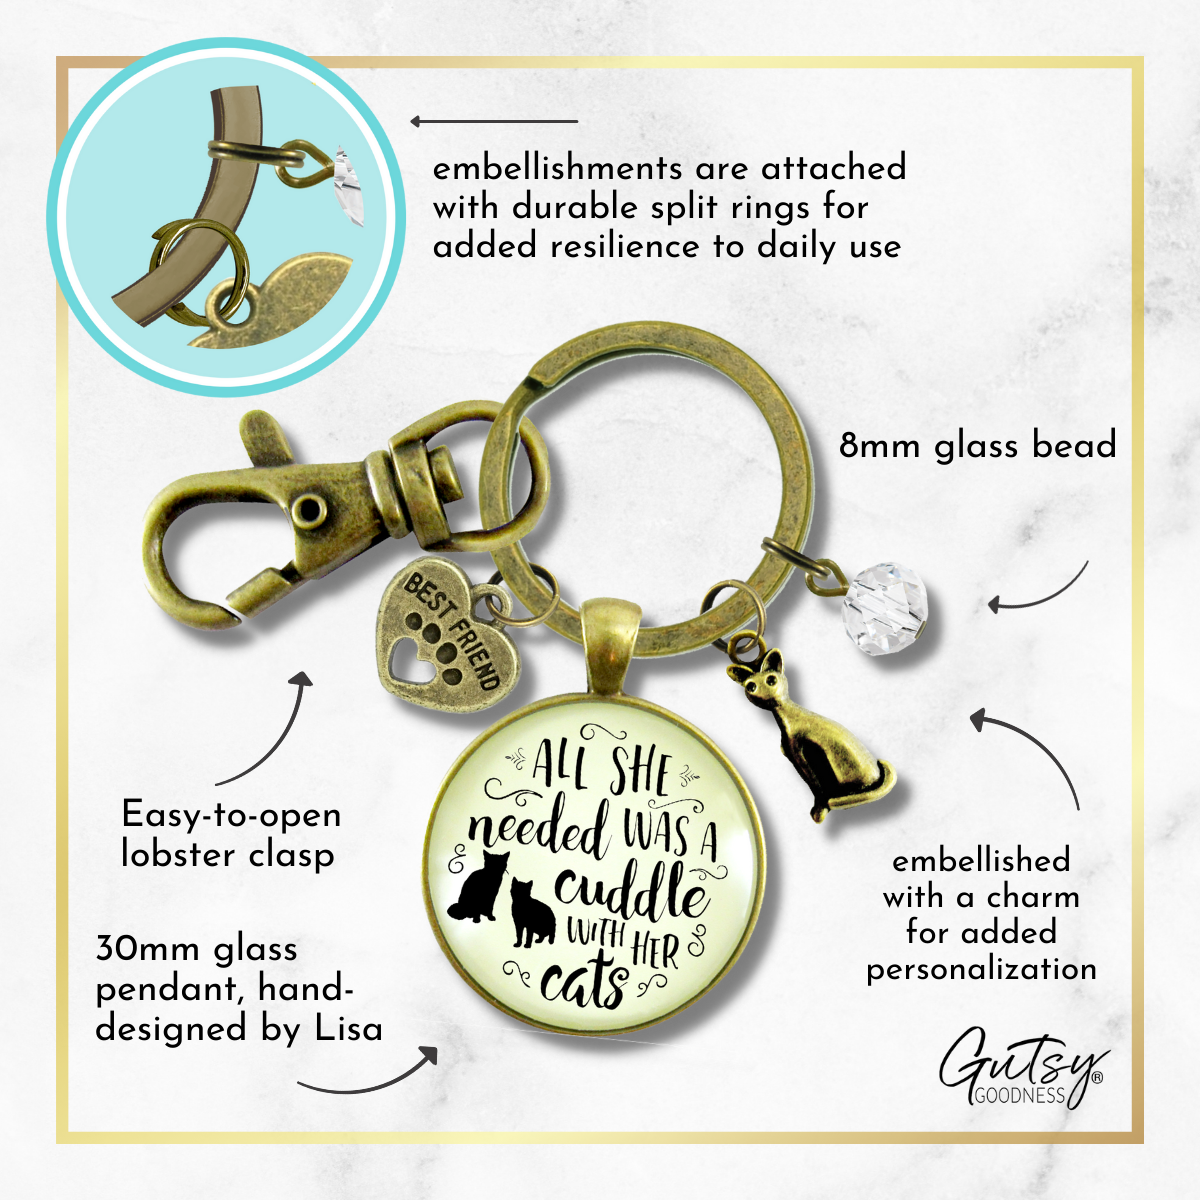 Cats Keychain All She Needed Was Cuddle Kitty Theme Gift Chic Cats Jewelry For Women - Gutsy Goodness Handmade Jewelry;Cats Keychain All She Needed Was Cuddle Kitty Theme Gift Chic Cats Jewelry For Women - Gutsy Goodness Handmade Jewelry Gifts